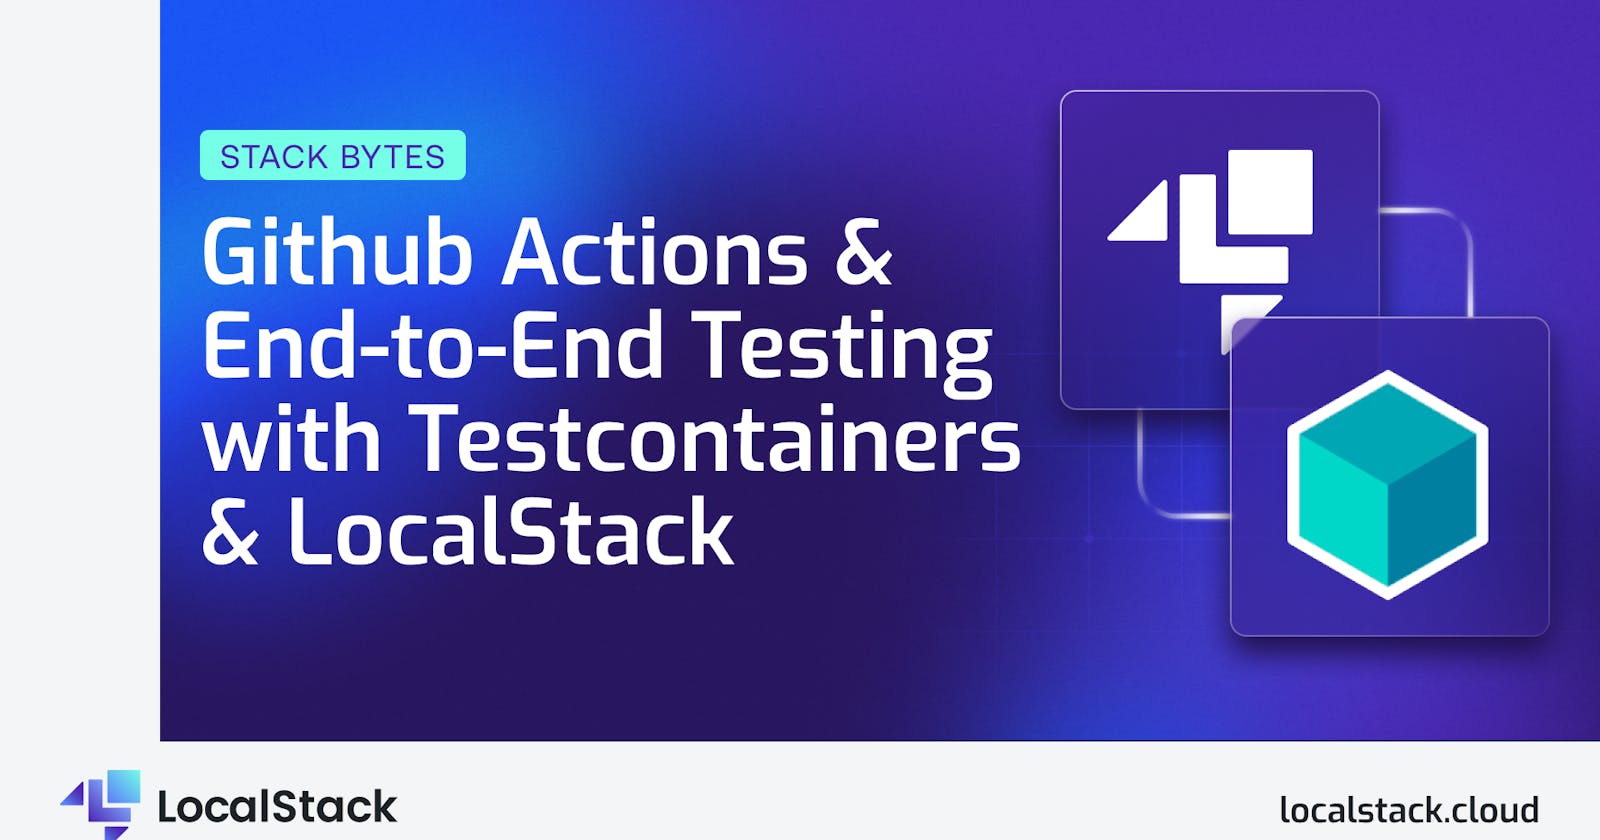 Github Actions & End-to-End Testing with Testcontainers & LocalStack